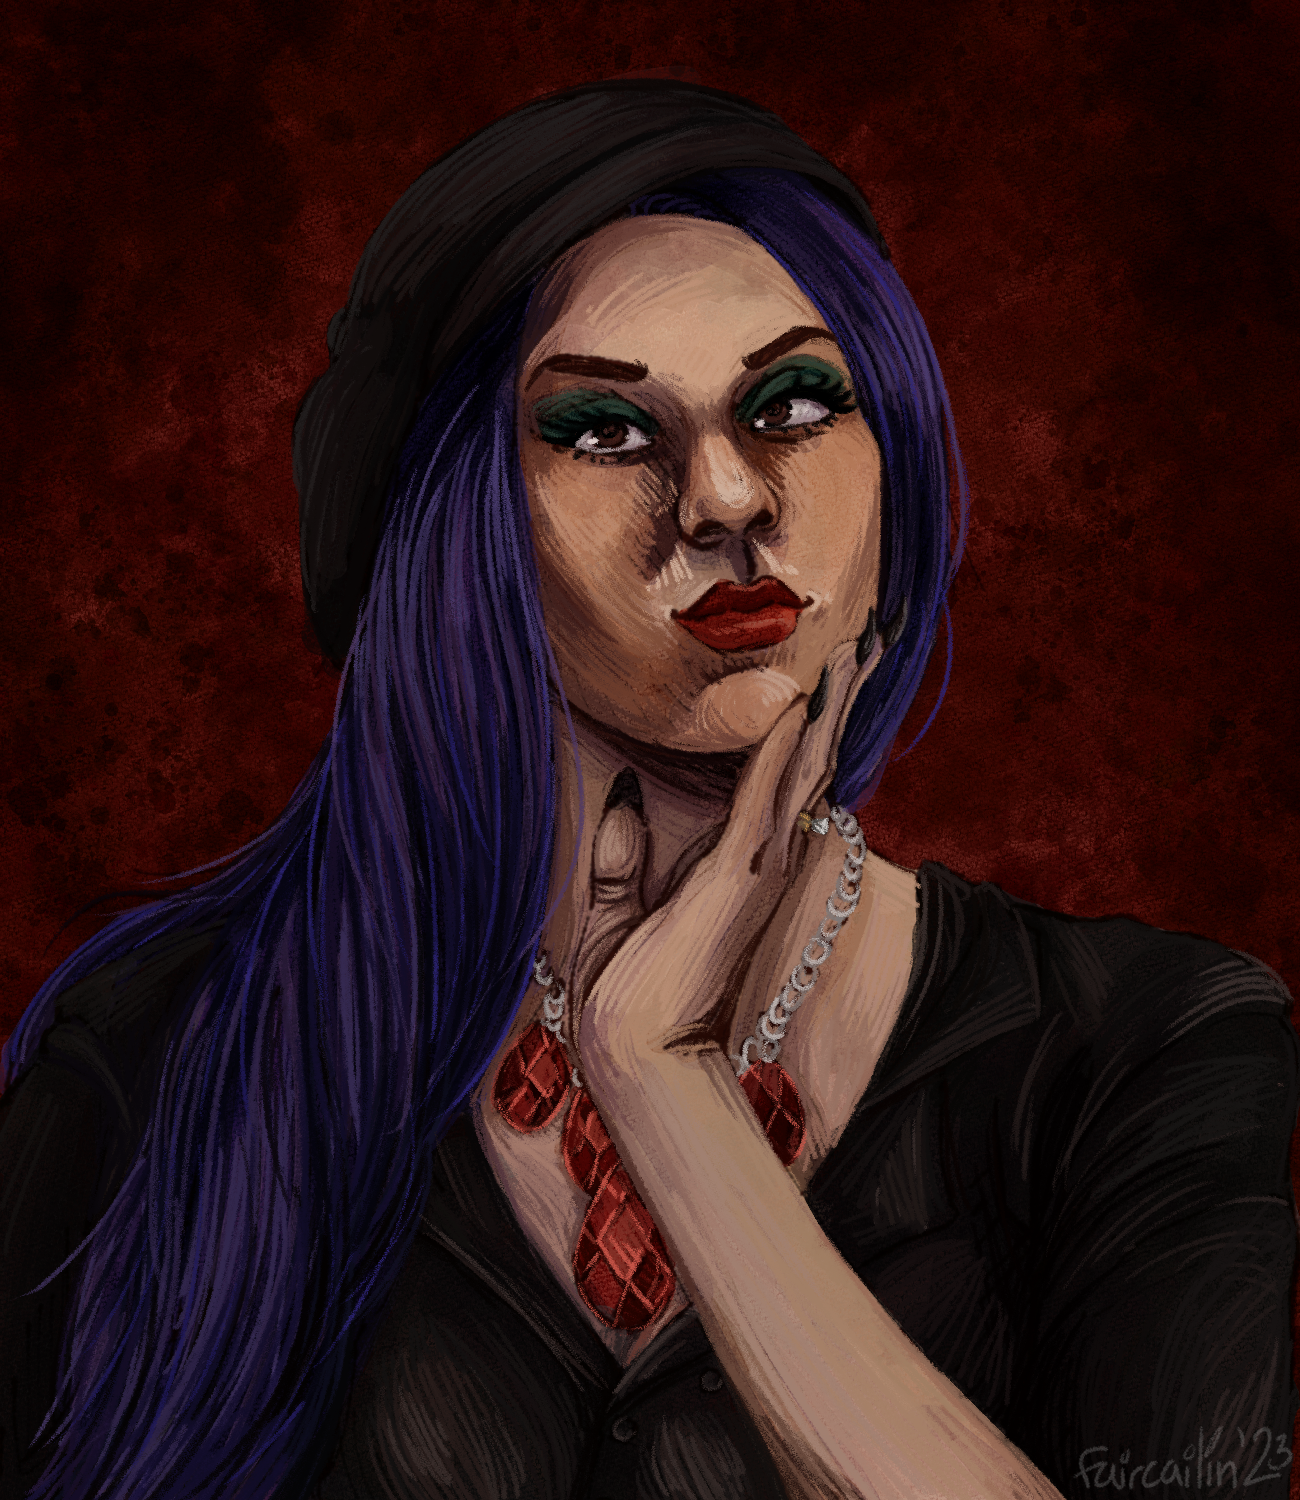 A portrait of Nelli G. from LA by Night. She's a latina vampire in her early thirties, with long, straight, dark blue hair and brown eyes. She's wearing a black beret and blouse, and a necklace with very large red crystals on it. She has her hand to her face and give the viewer a coy smile.